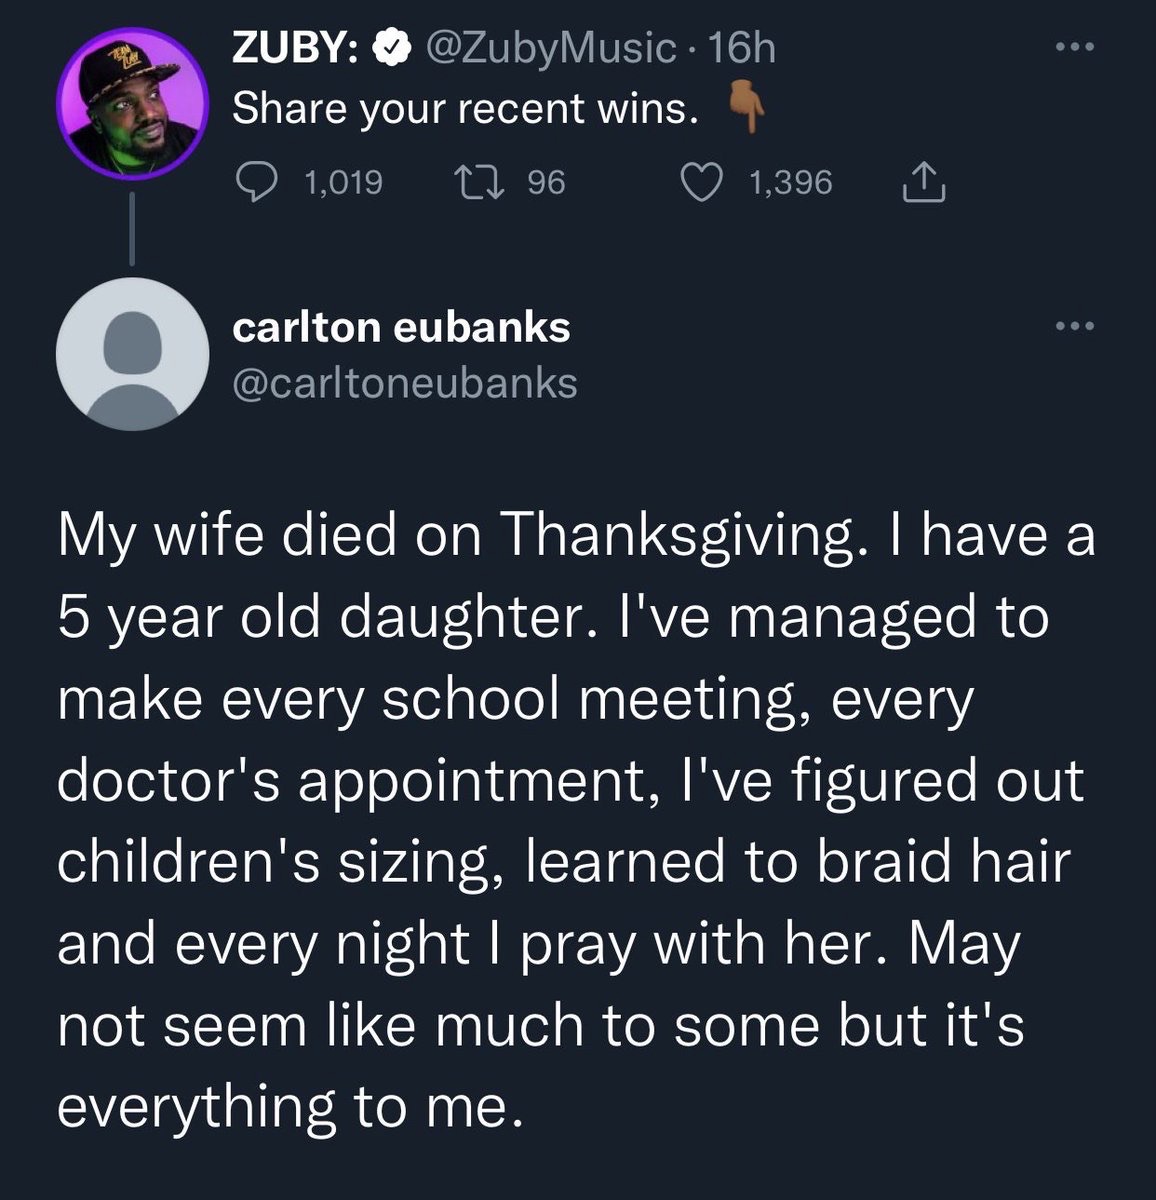 dudes post wins - bad is good for you - . Zuby 16h your recent wins. 1,019 12 96 1,396 @ carlton eubanks My wife died on Thanksgiving. I have a 5 year old daughter. I've managed to make every school meeting, every doctor's appointment, I've figured out ch